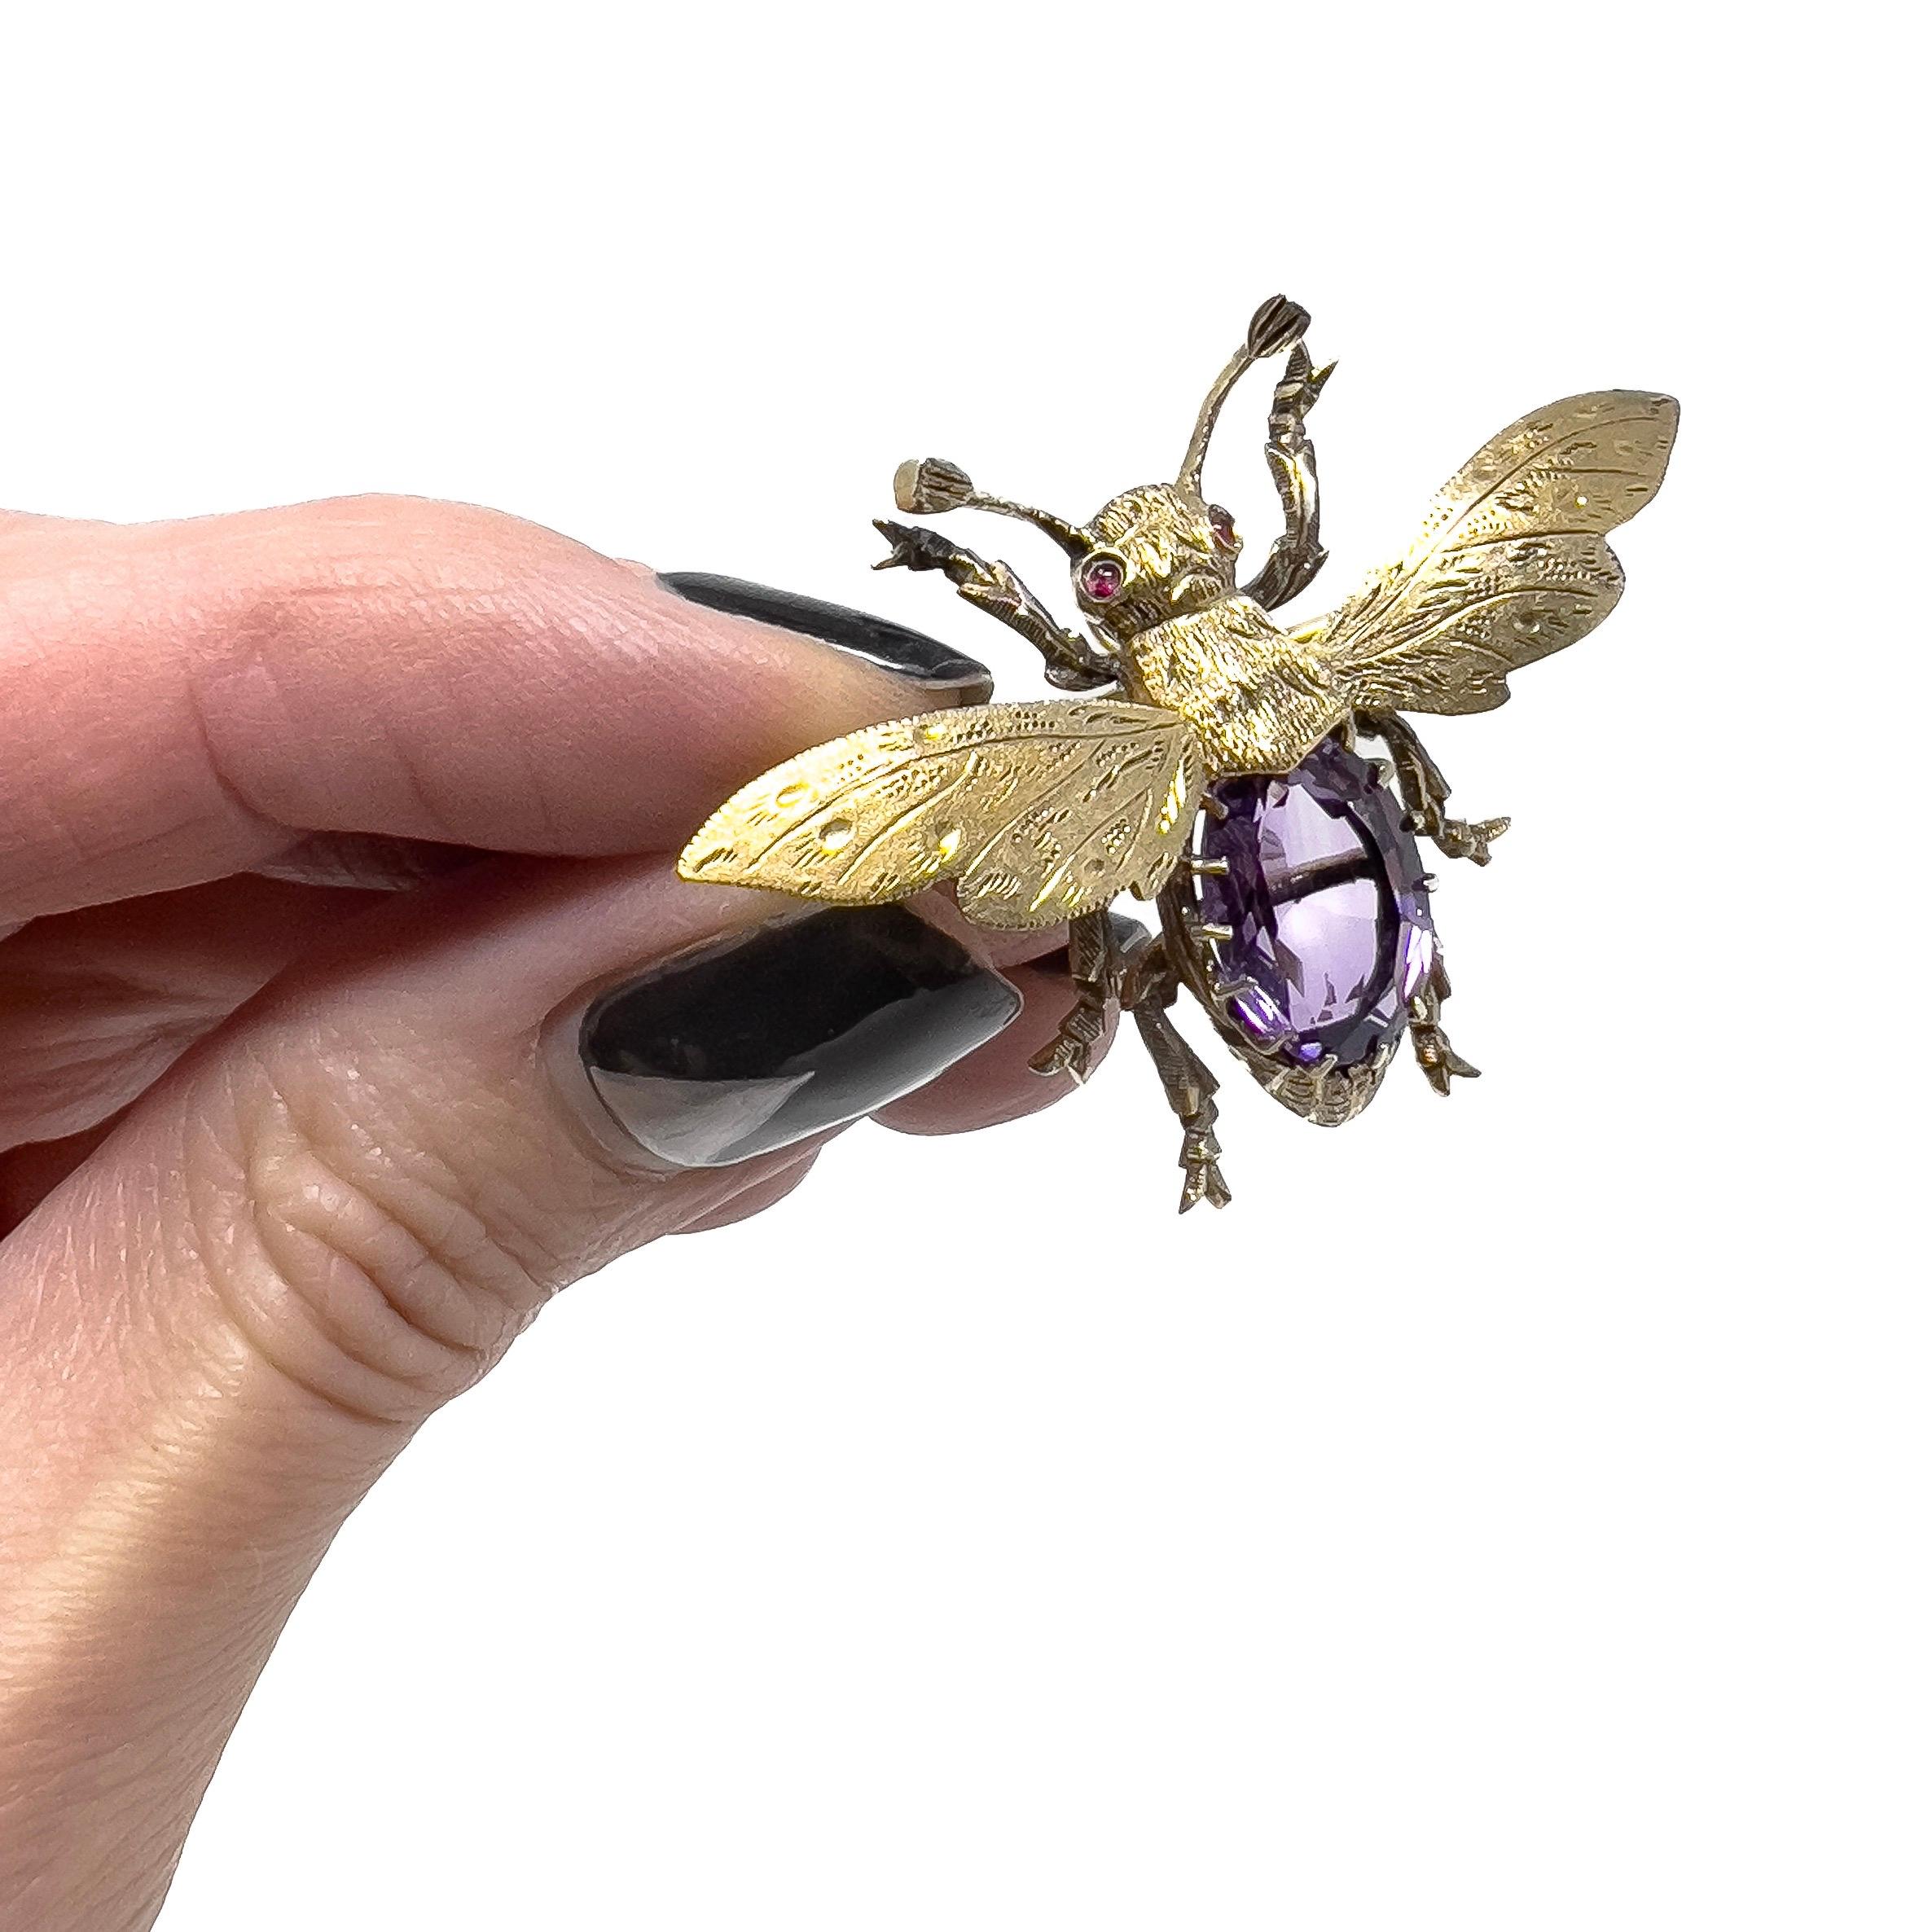 Detailed and beautiful, this brooch was created in the mid 1800s.

Condition Report:
Excellent

The Details...
Although unhallmarked, this brooch has been tested as being constructed from gold plated silver. It features a winged insect design. The